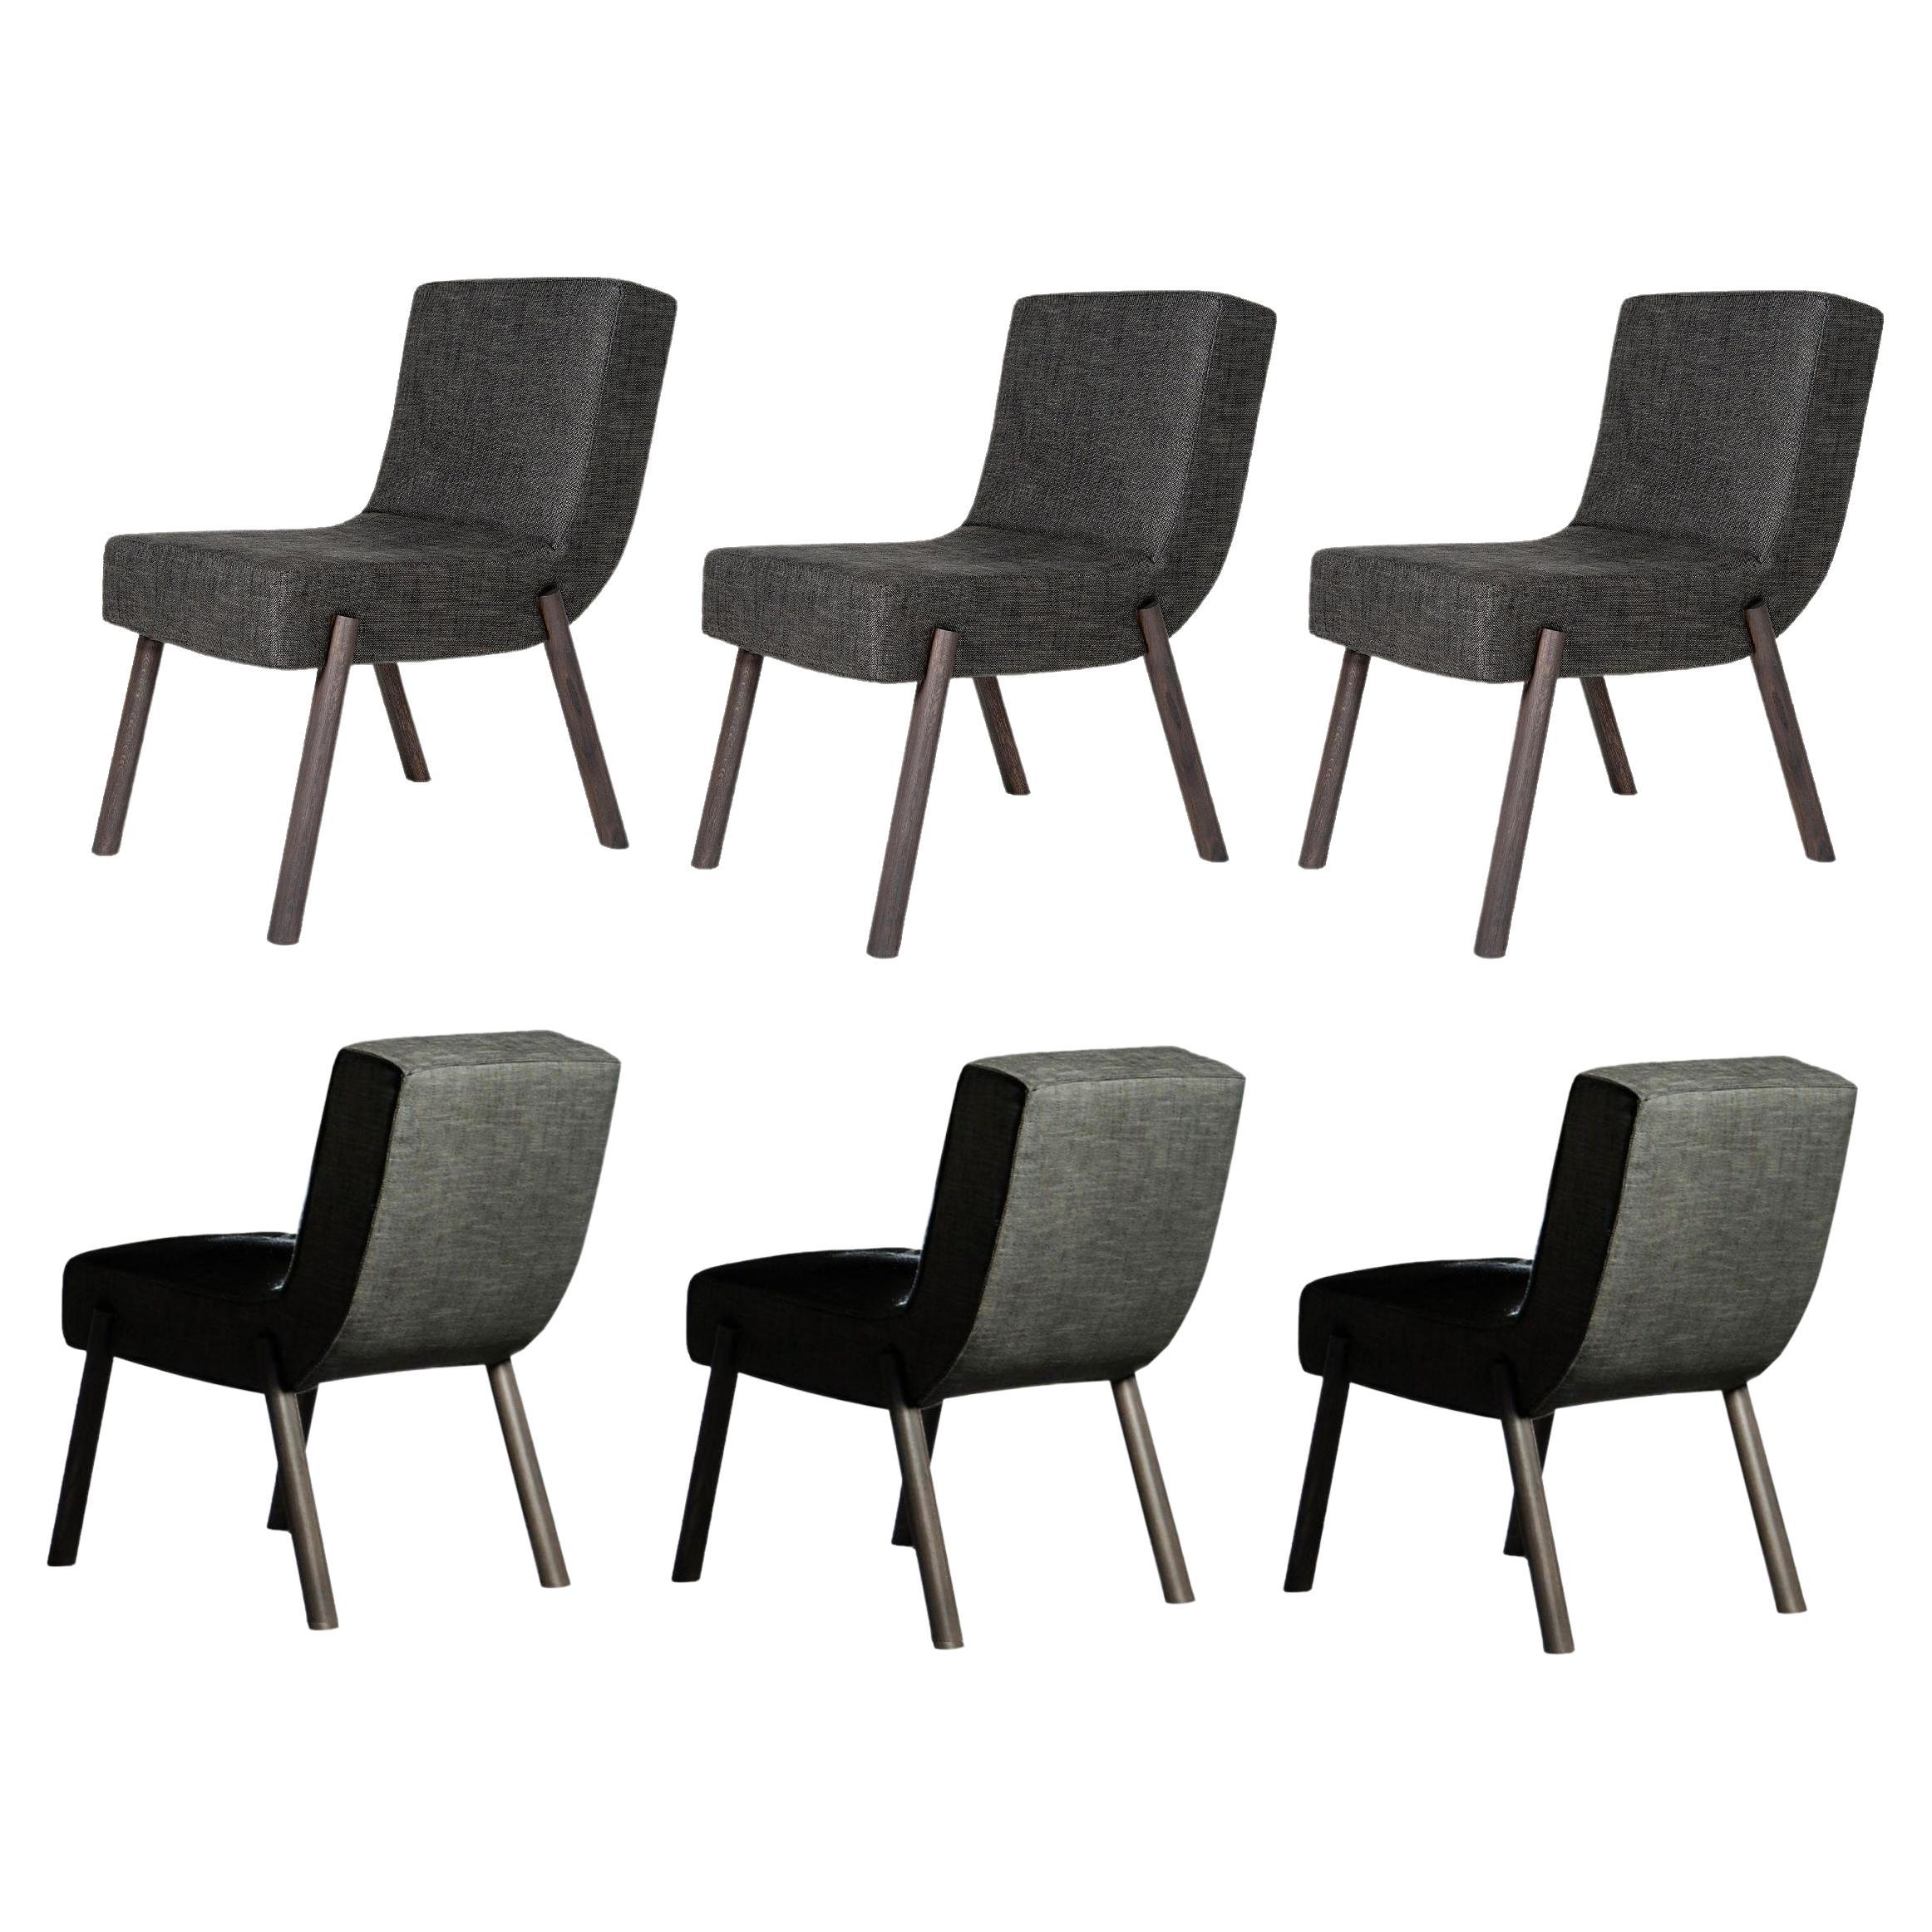 Comfortable dining chair upholstered in performance grey Lenin. 
Legs in dark grey solid oak.
Suitable for contract use.
100% European made product.
“Minimum order of 4 chairs.”
 Contact us to enquire about COM/COL production, requirements and